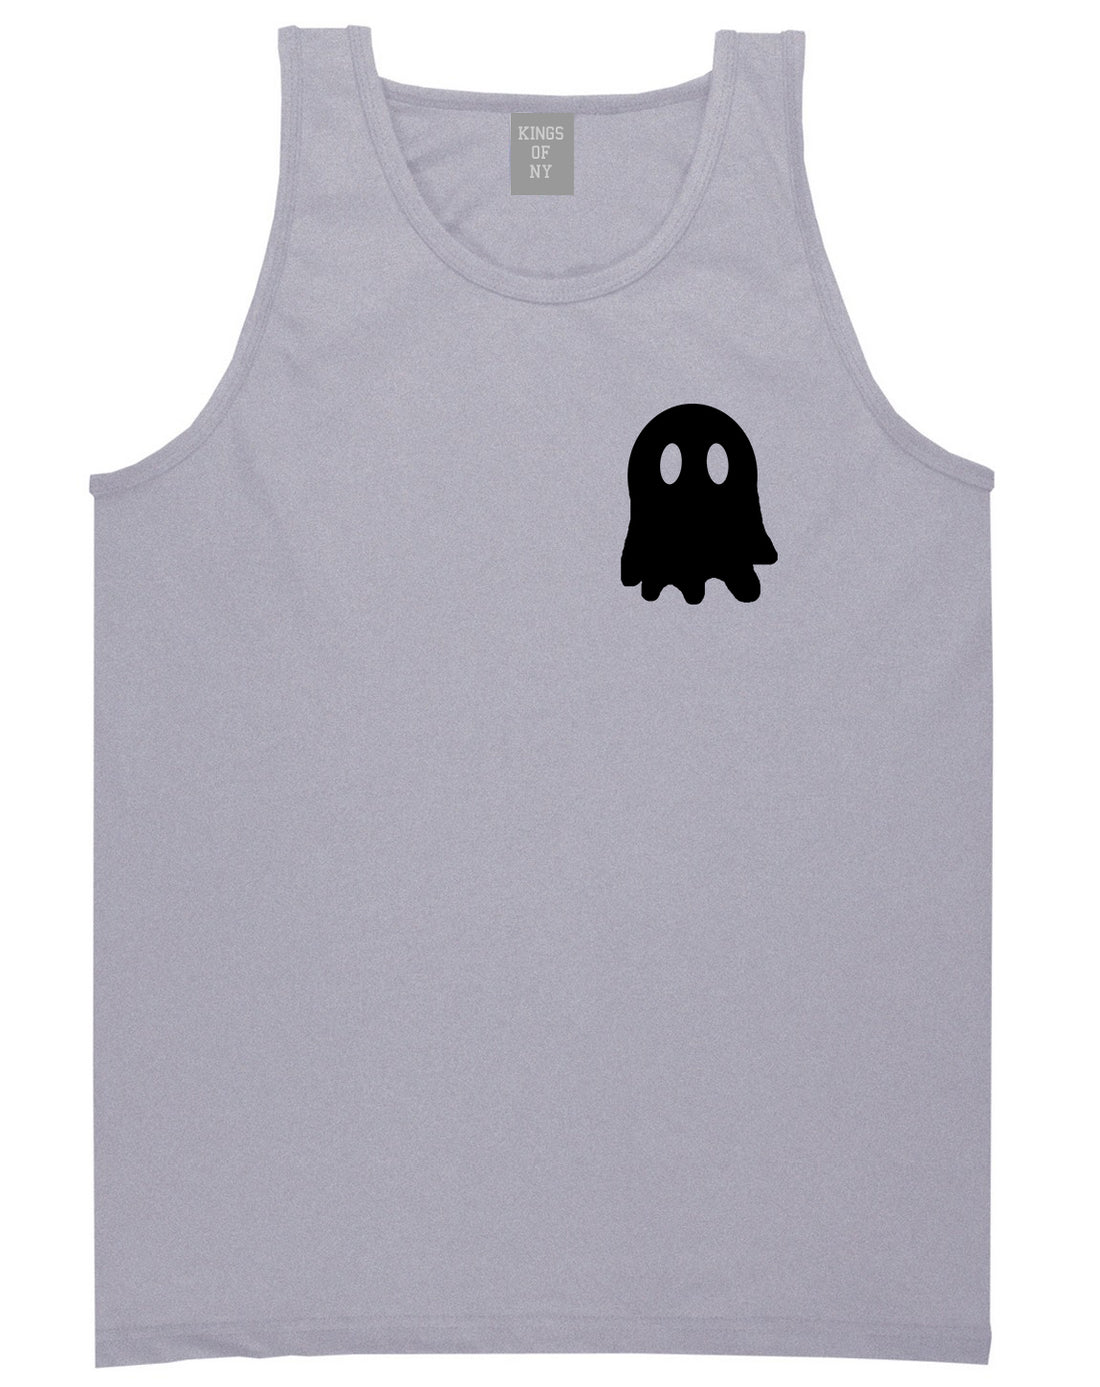 Ghost Chest Mens Grey Tank Top Shirt by KINGS OF NY